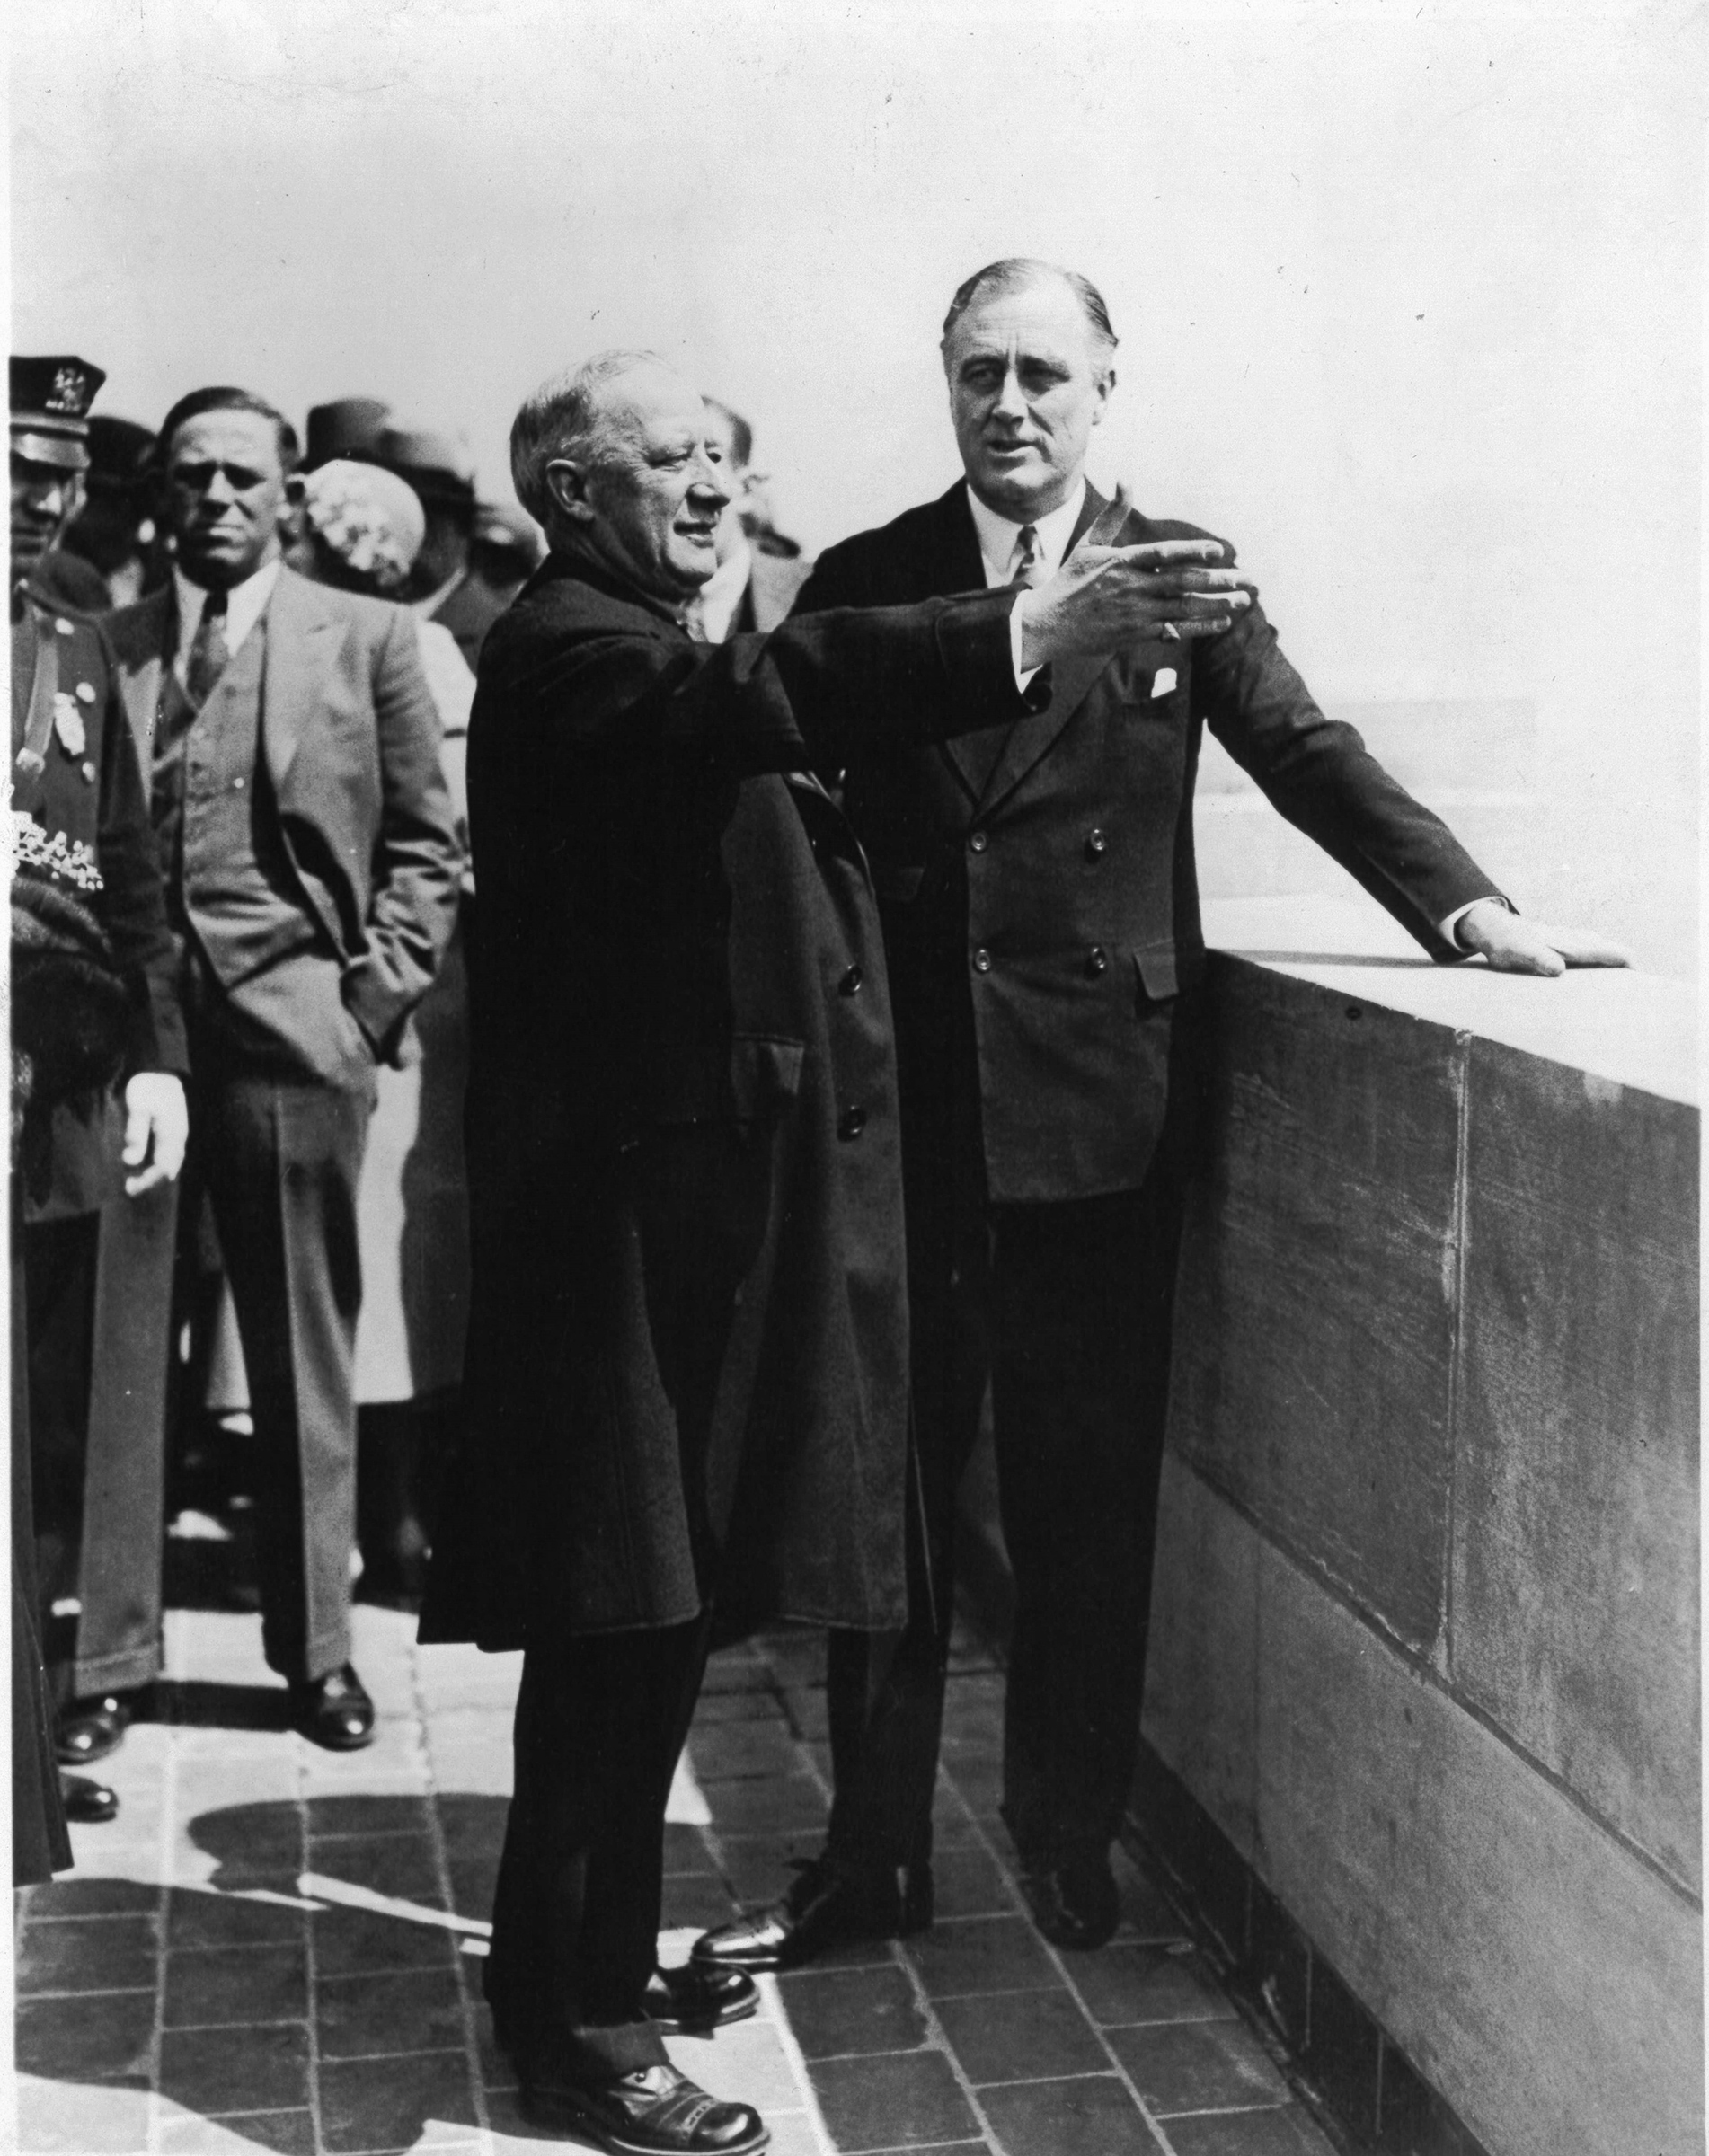 Ex-Governor Smith points out the sights of the city to Governor Roosevelt from 1 of 2 observation floors on May 1, 1931.